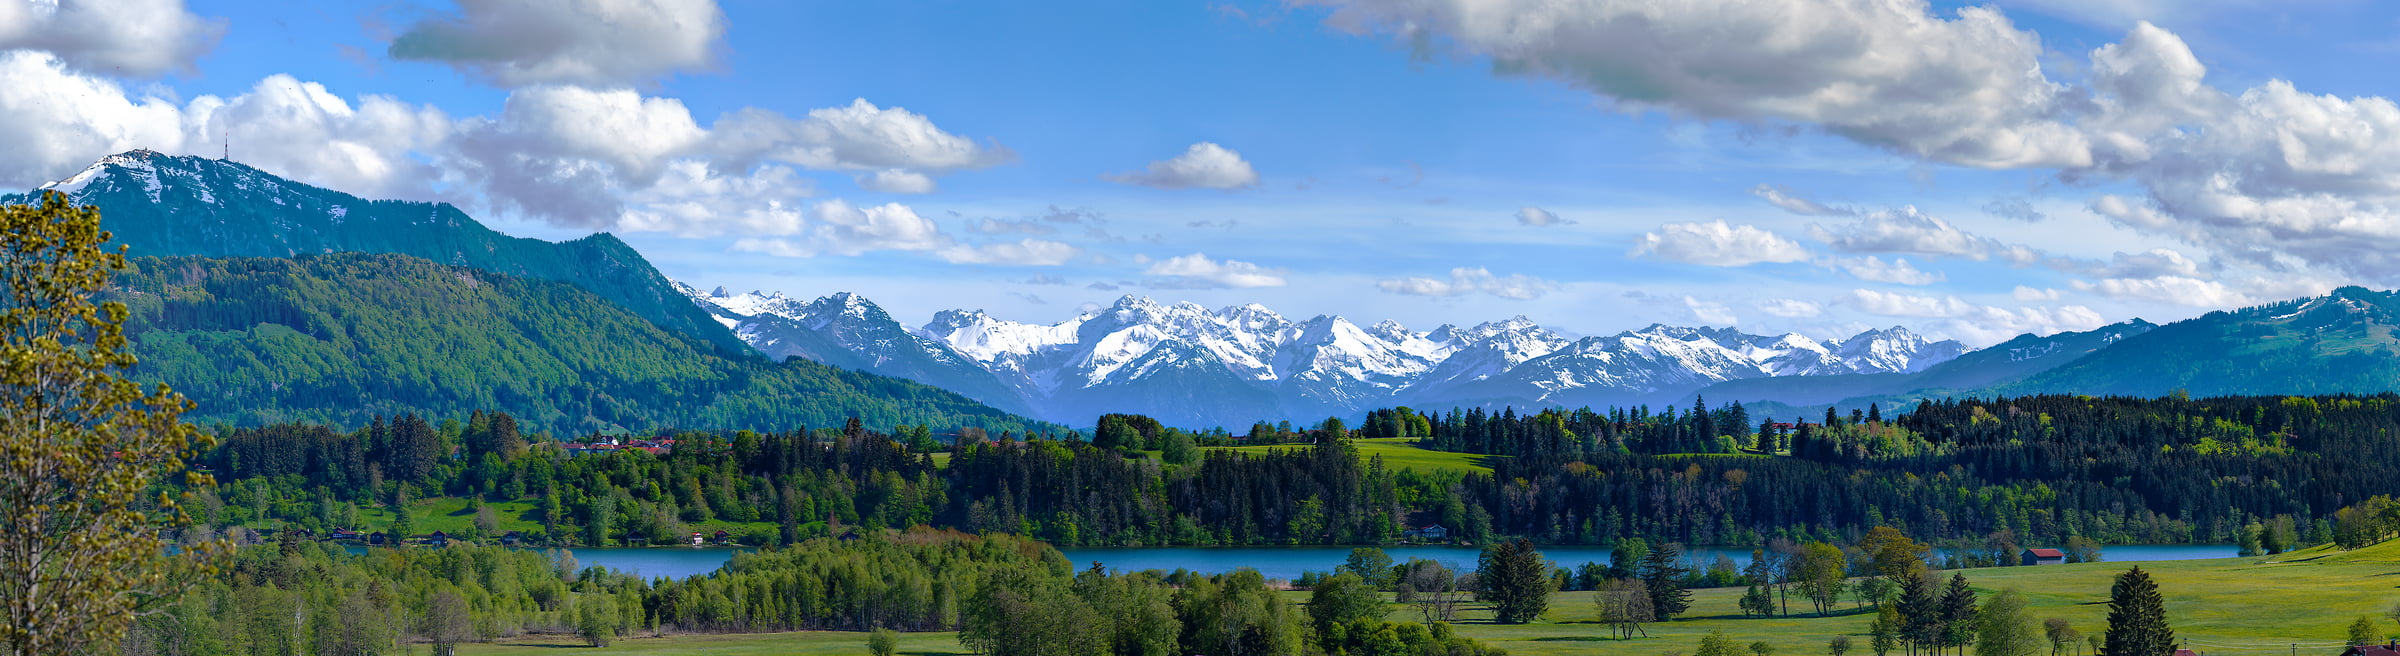 691 megapixels! A very high resolution panorama photo of a German landscape; photograph created by Alfred Feil in Lake Niedersonthofen, Allgaeu, Bavaria, Germany